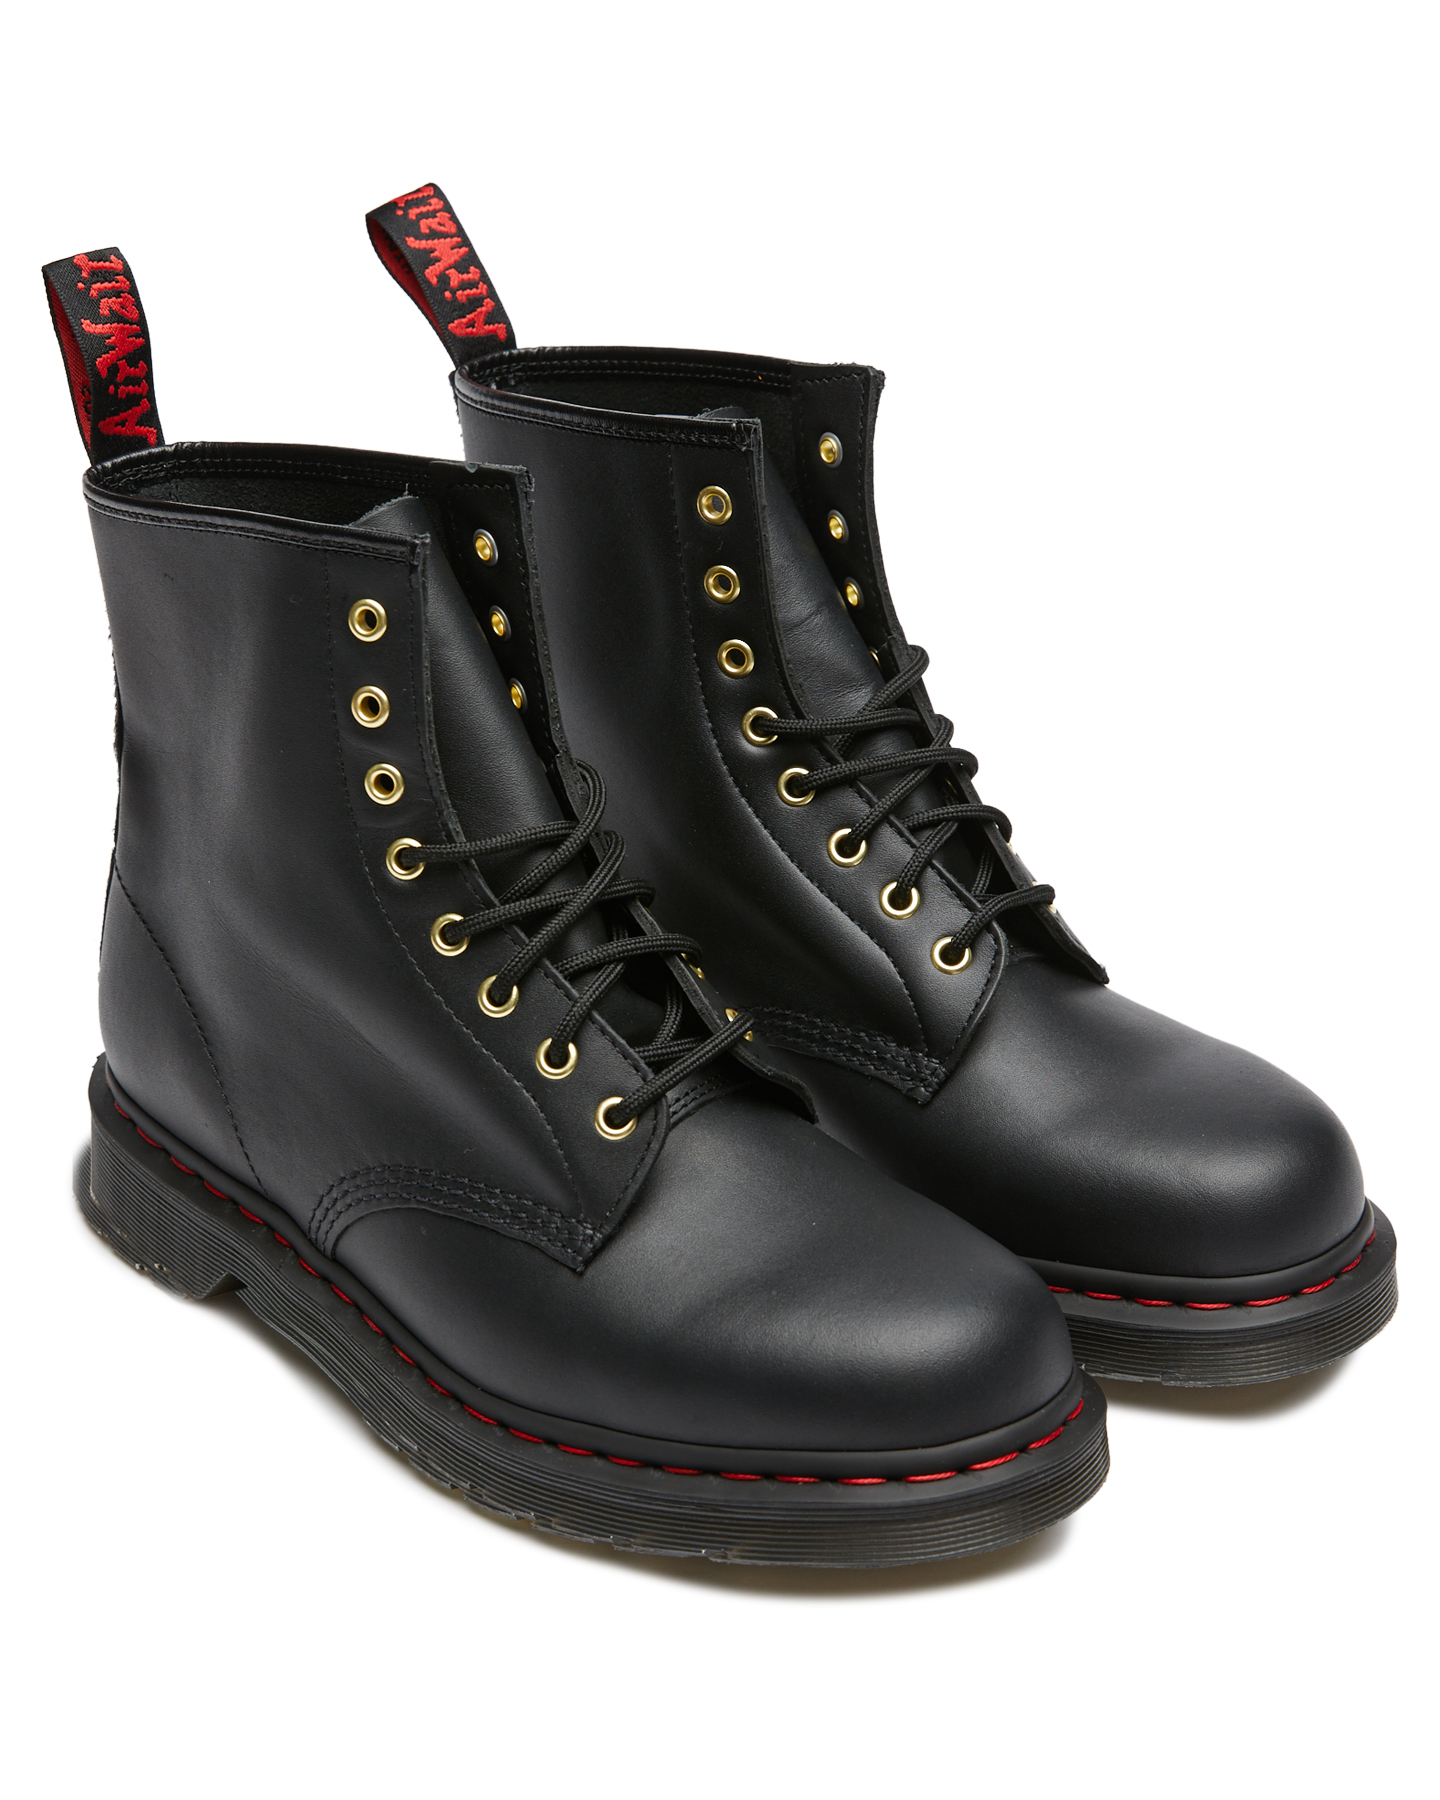 Dr. Martens Mens 1460 Chinese Ny Boots - Black | SurfStitch